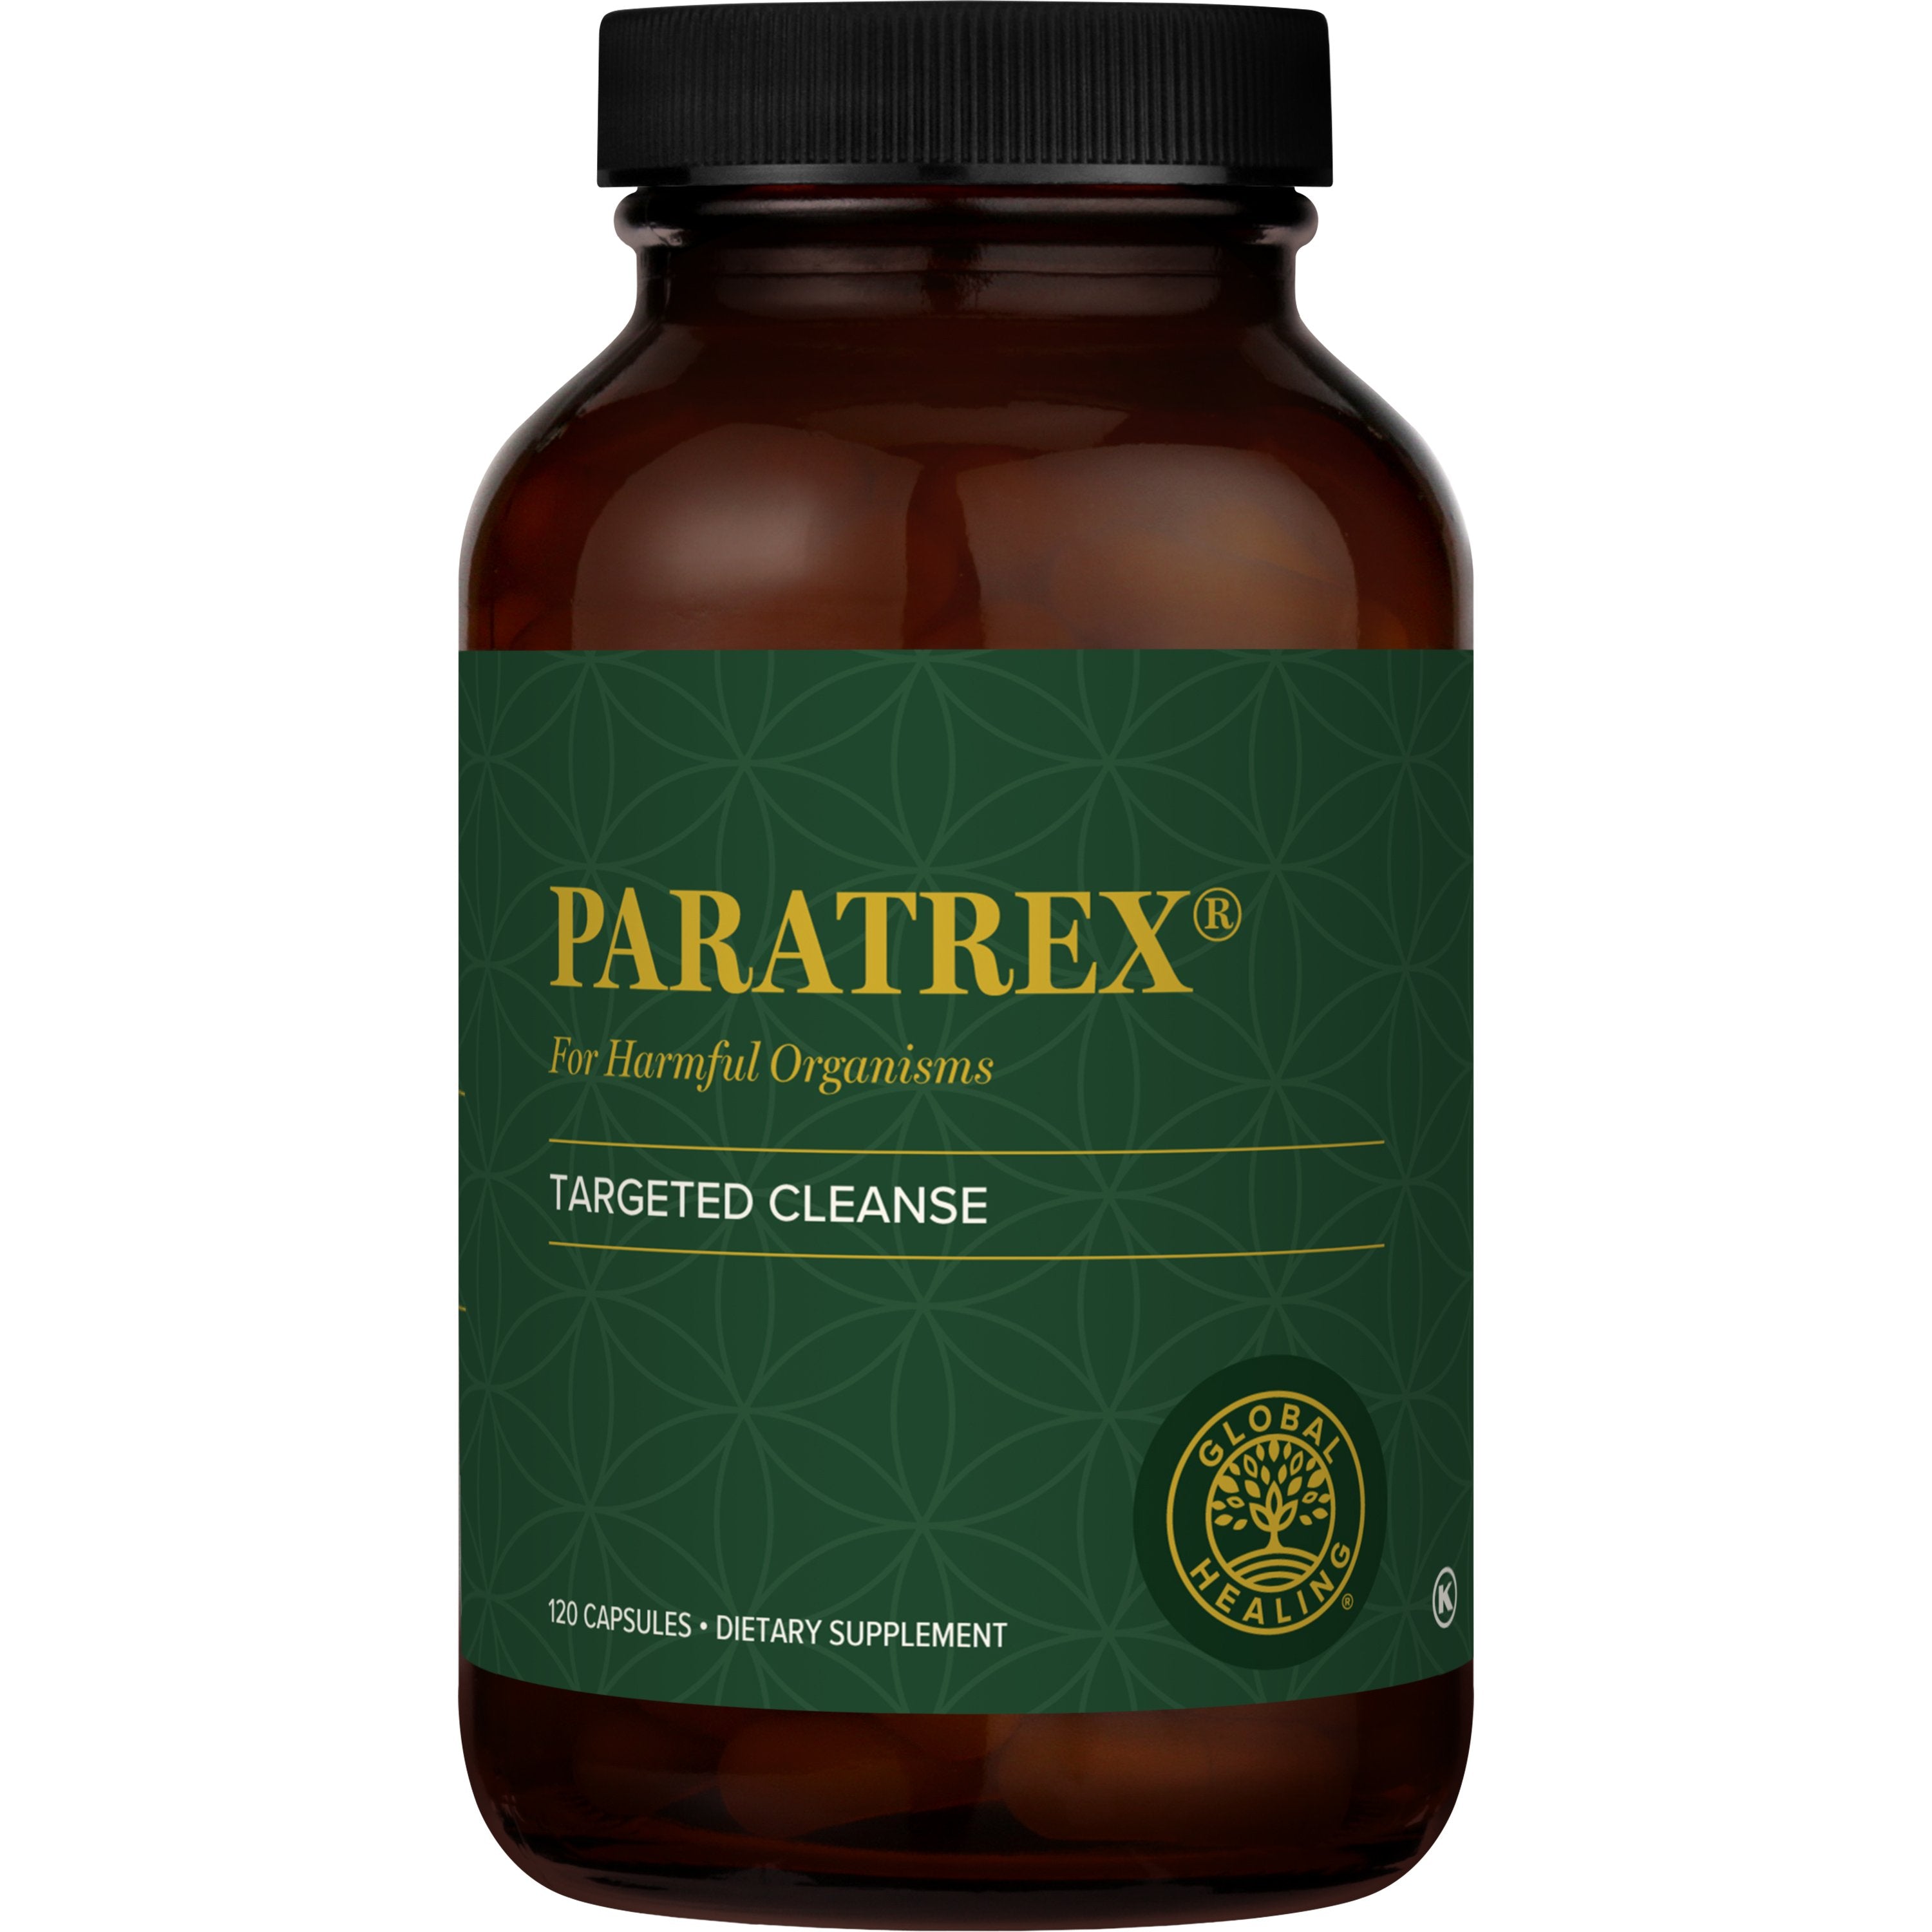 Global Healing's Paratrex is a targeted cleanse formulated to eliminate harmful organisms.